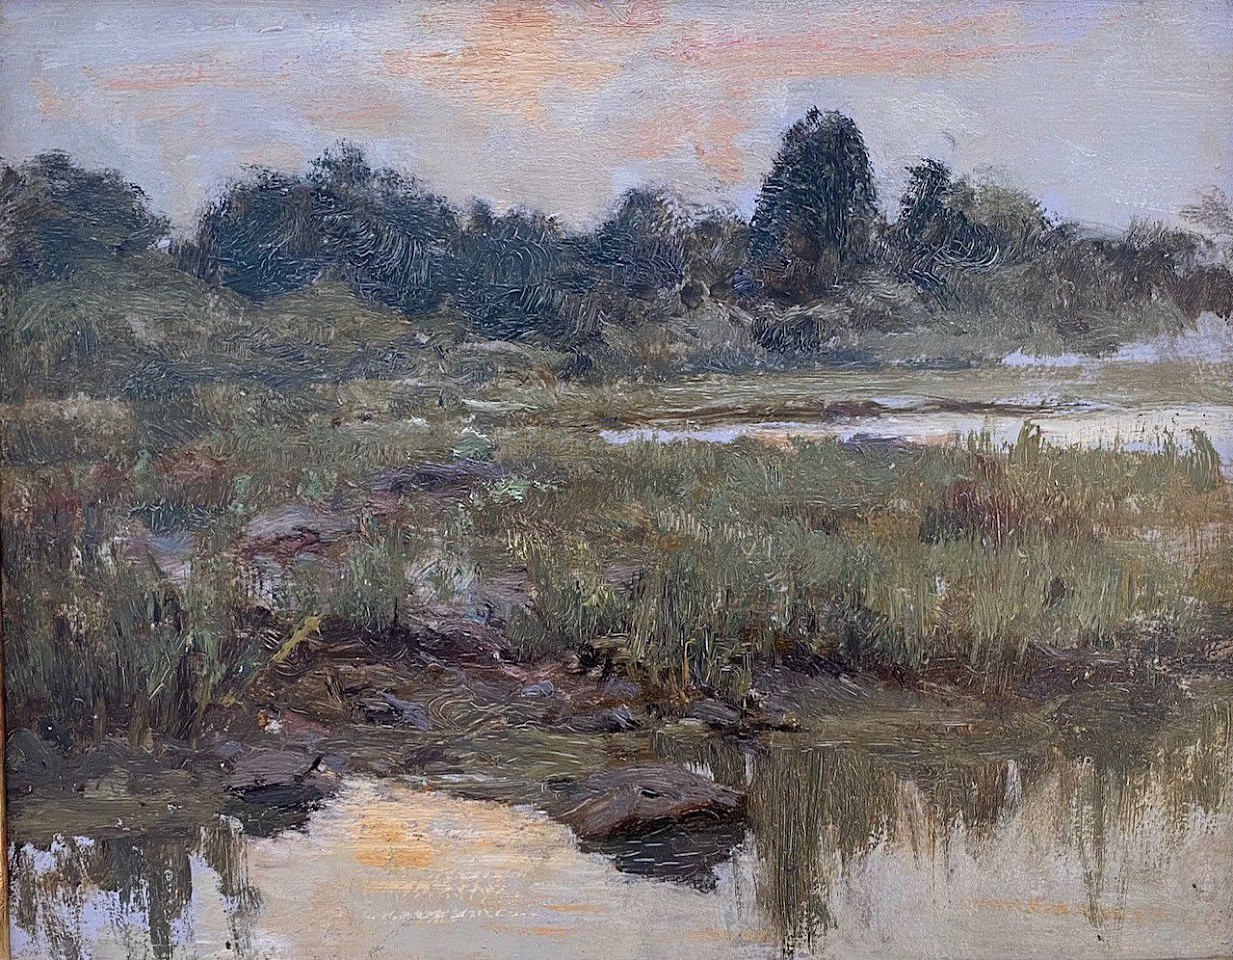 Jules Turcas, In the Marshes
oil on panel, 10 1/2"" x 13 1/4""
JCA 6651
$2,500